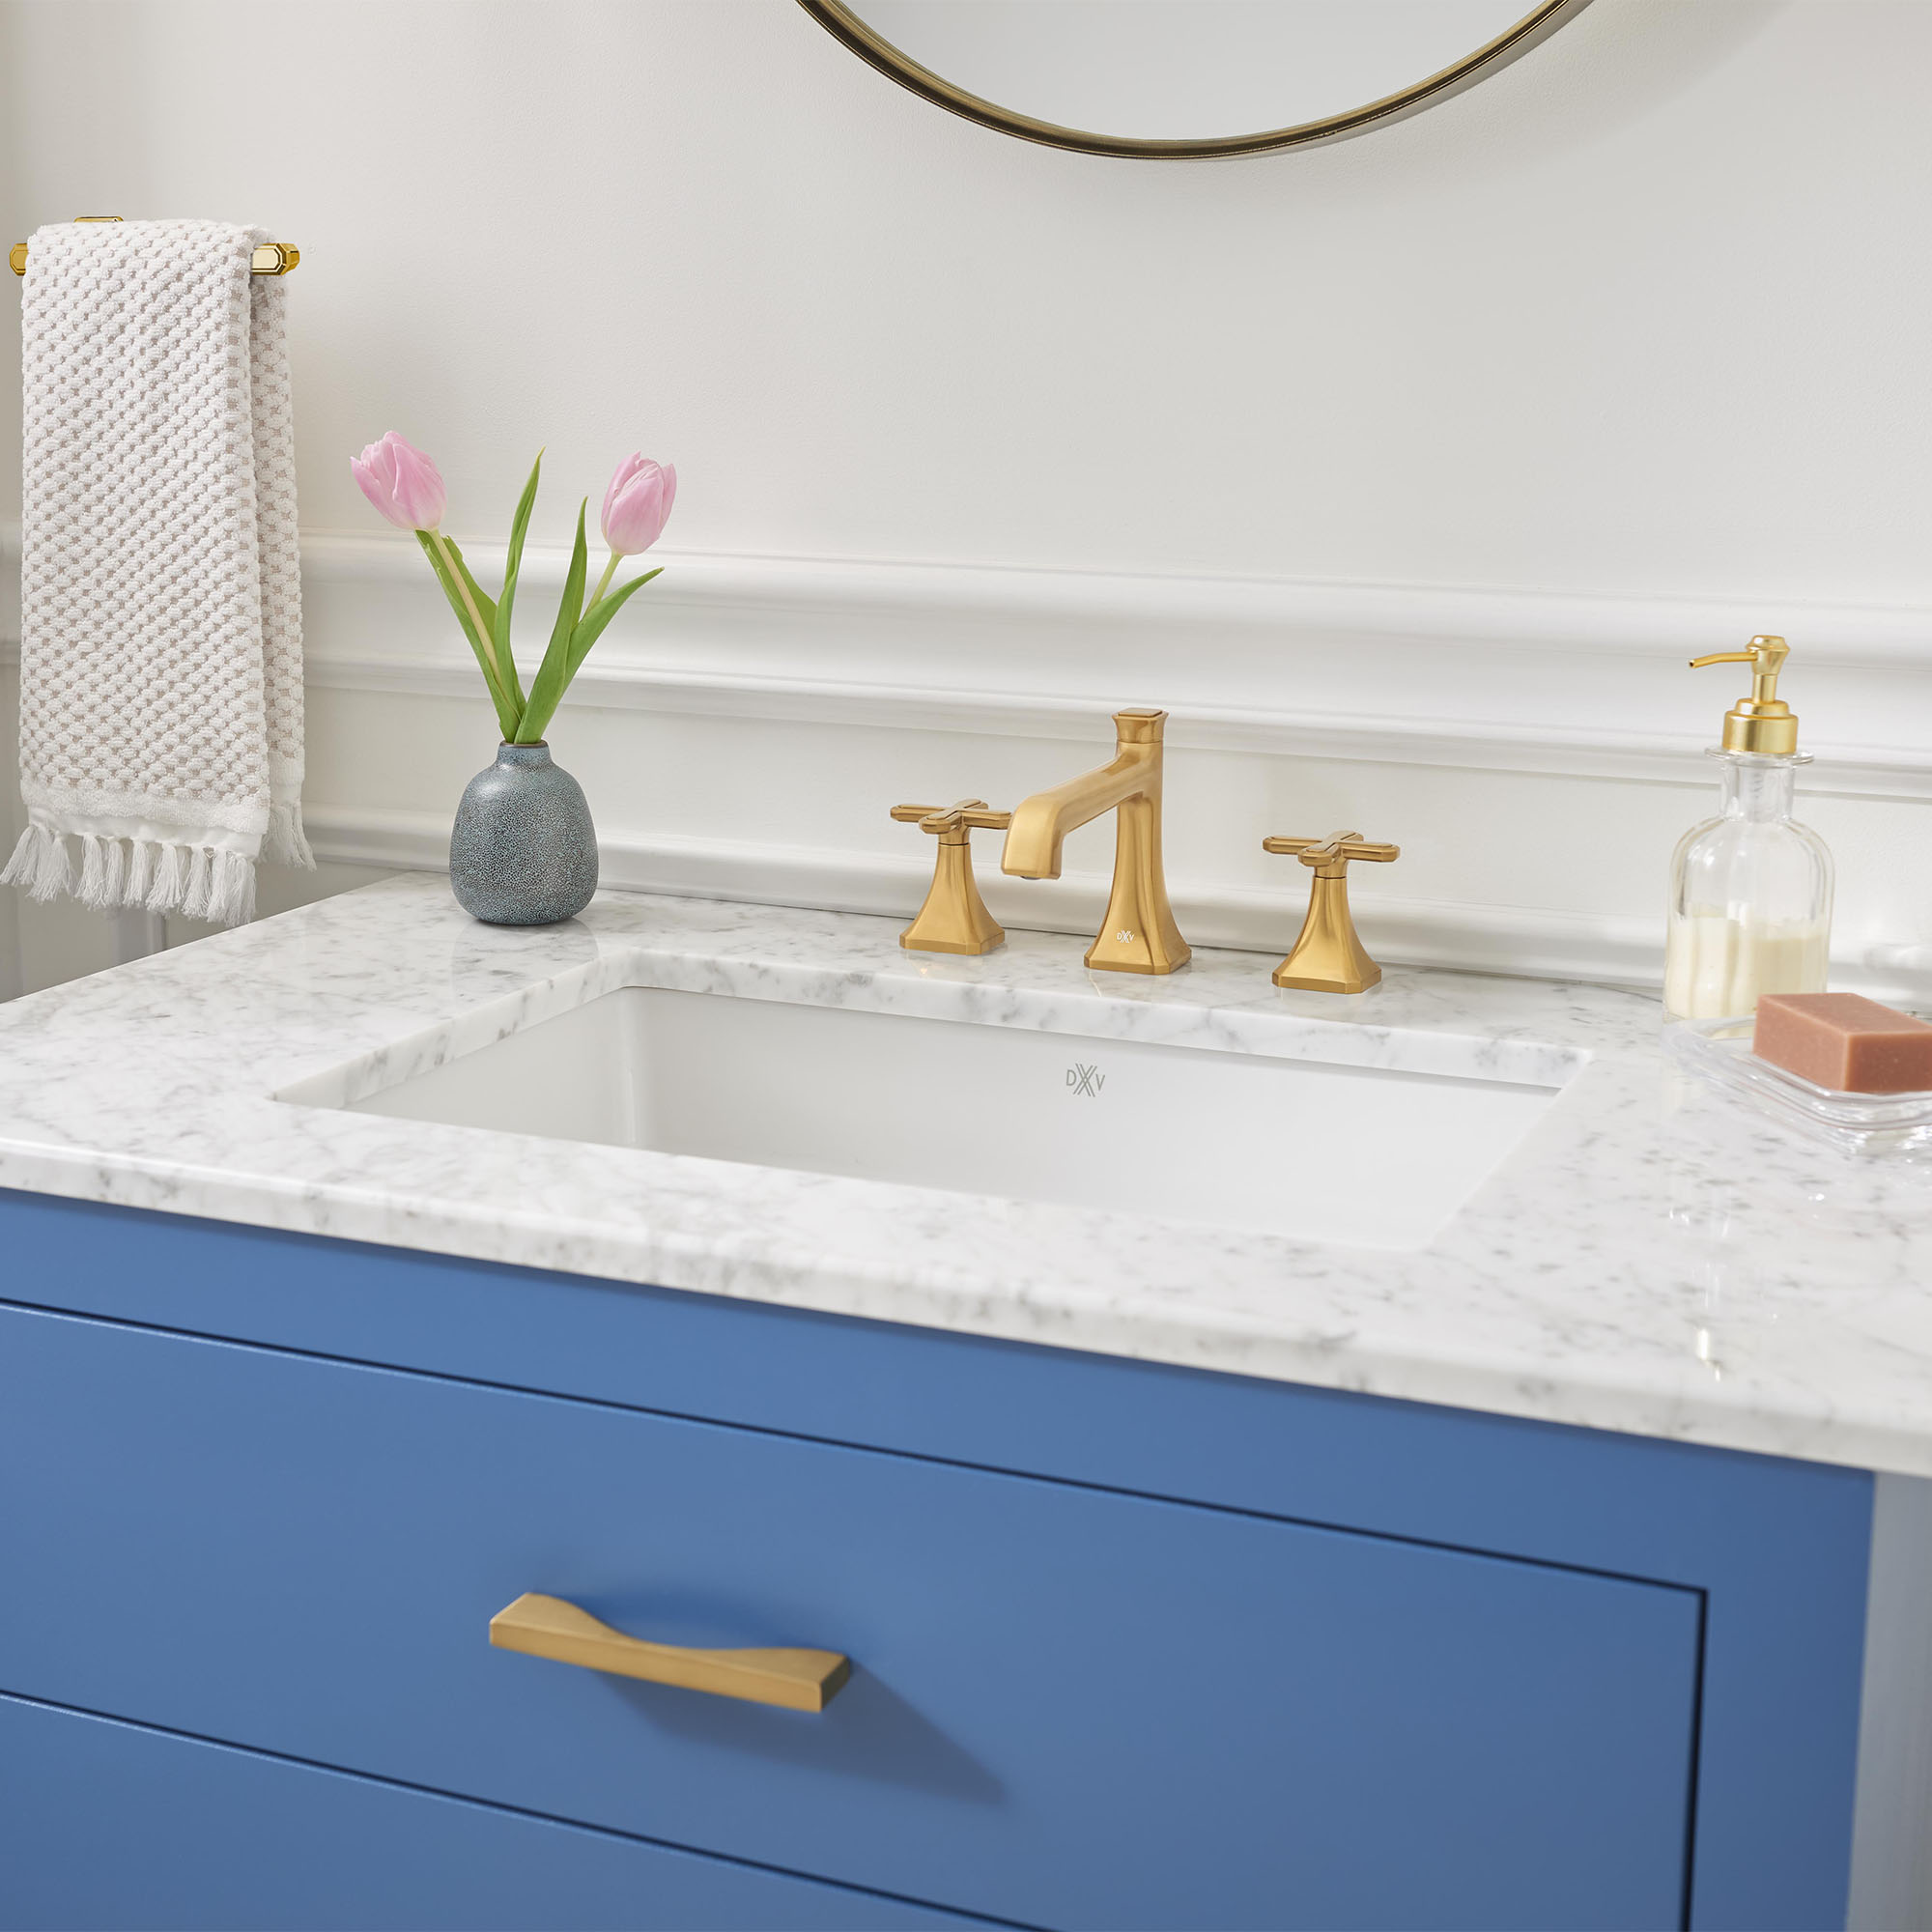 Belshire® Cross Handles Only for Widespread Bathroom Faucet